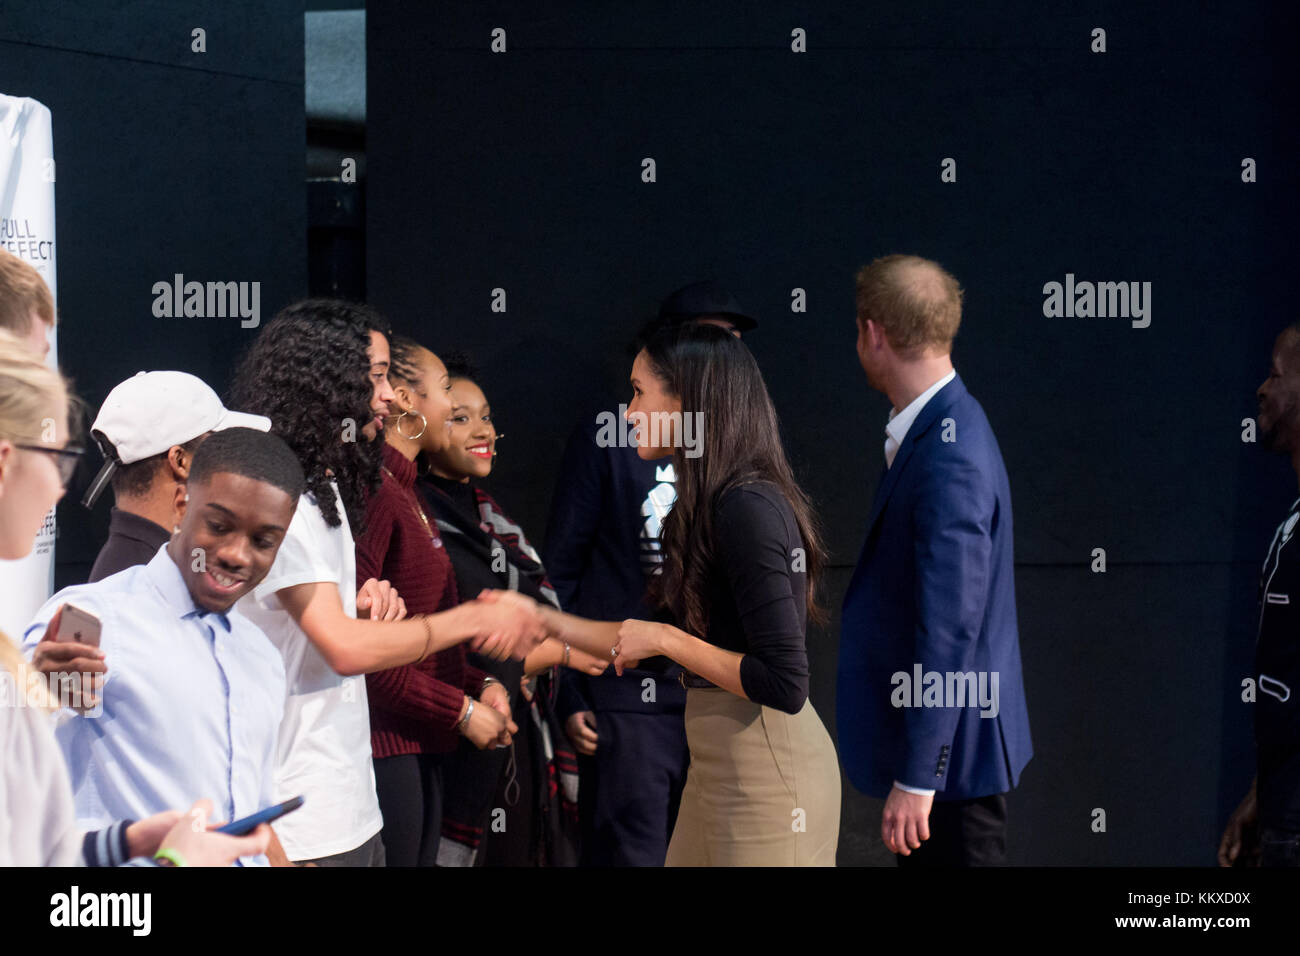 Nottingham, UK. 1st Dec, 2017. Prince Harry's  fiancee US actress Meghan Markle shake hands with the cast and crew of a hip hop opera performed by young people involved in the Full Effect programme at the Nottingham Academy school December 1, 2017 in Nottingham, England. Credit: jamal sterrett/Alamy Live News Stock Photo